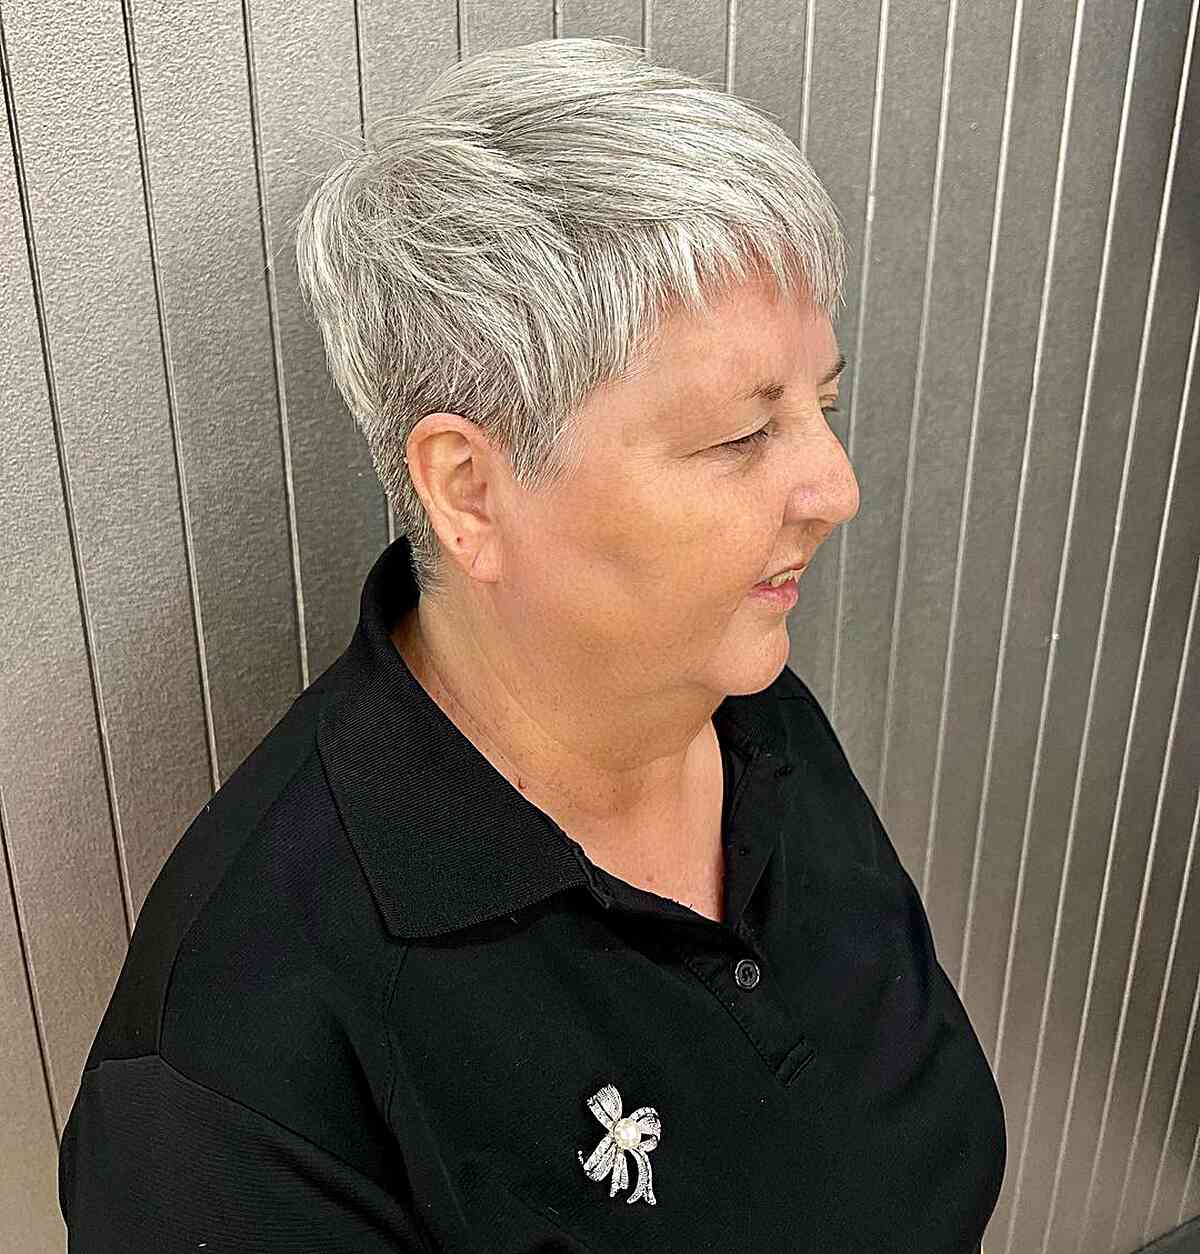 Short Tapered Feathered Pixie Hair with Choppy Bangs for Older Ladies Aged 60